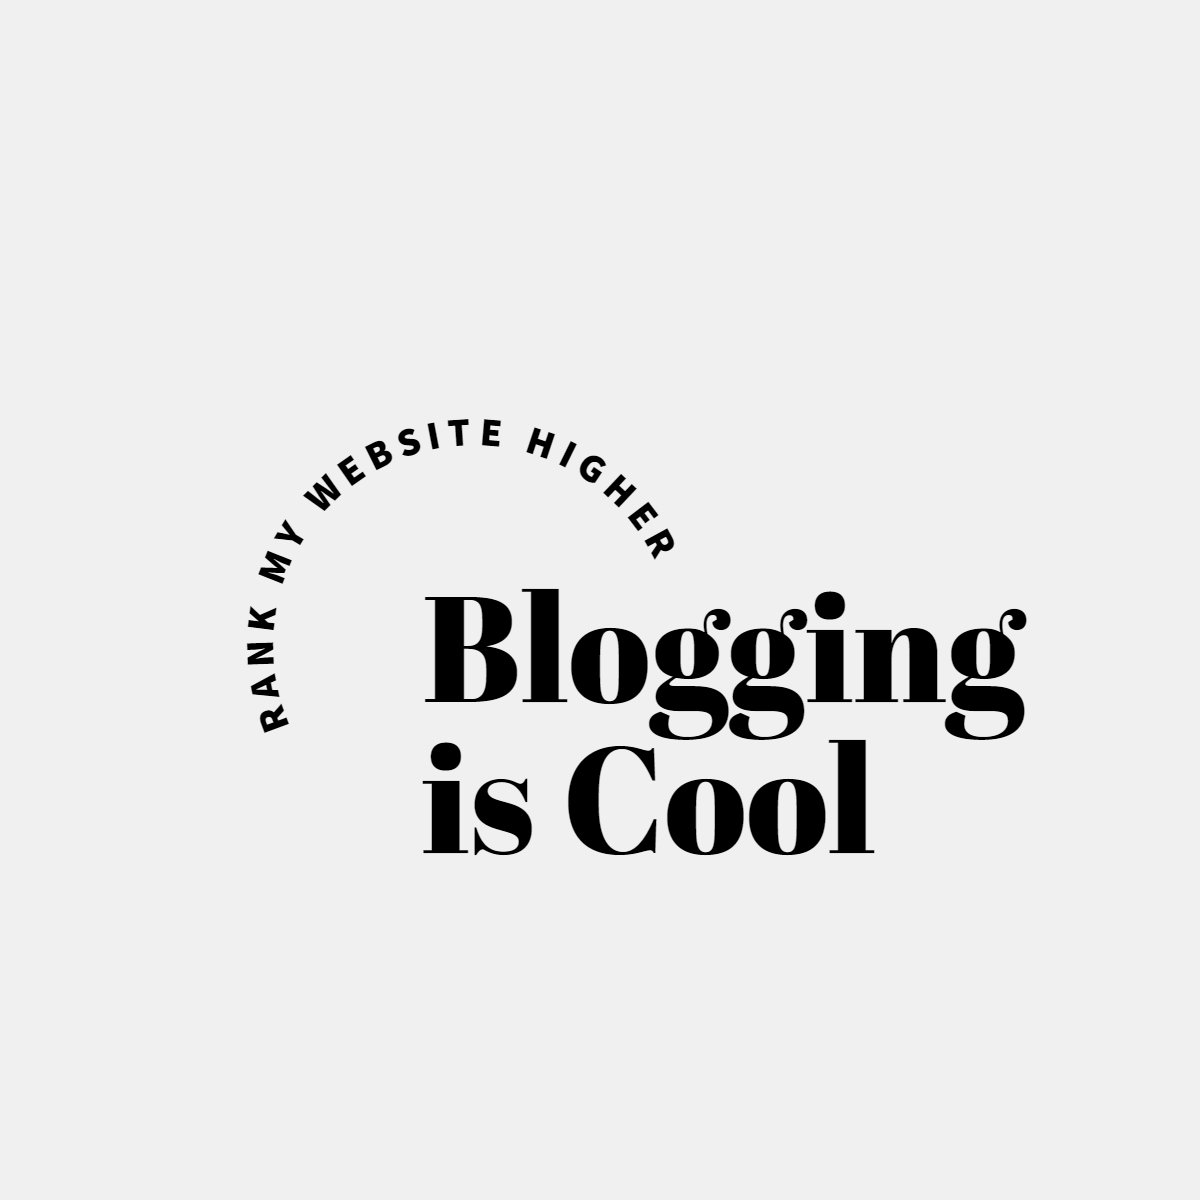 Bloggingiscool.com The Process of Deciding on a Domain Name for Your Blog